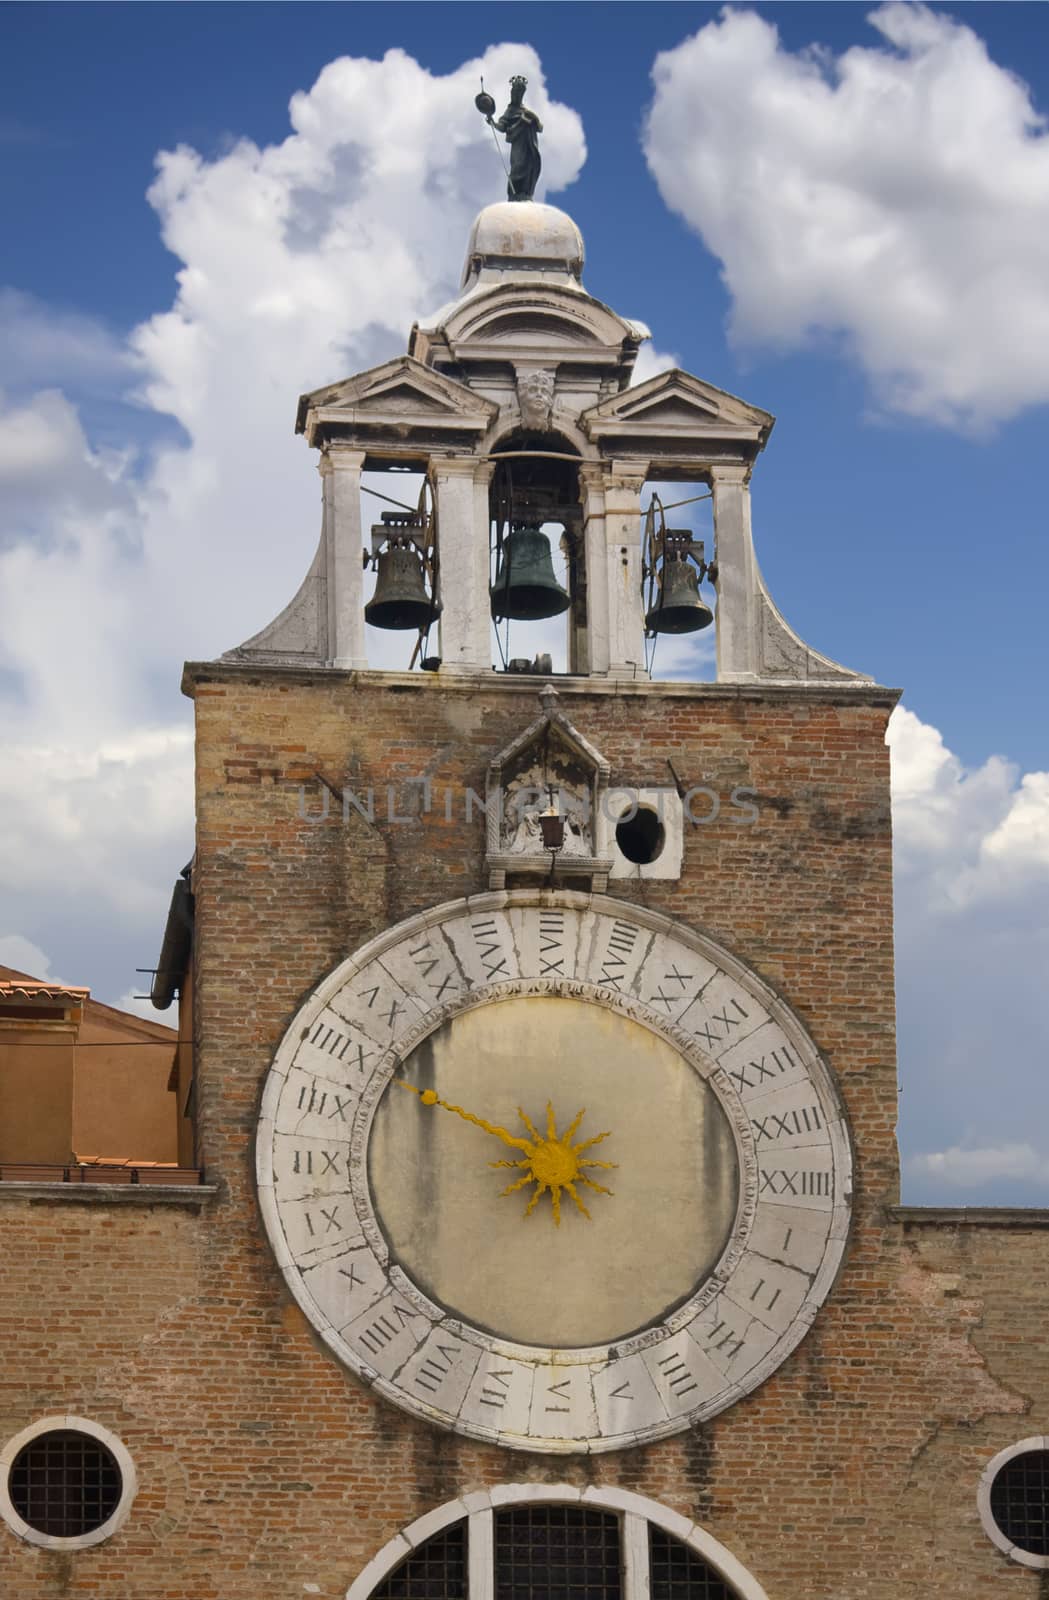 A clock tower with 24hr clock face in Venice by fotoecho